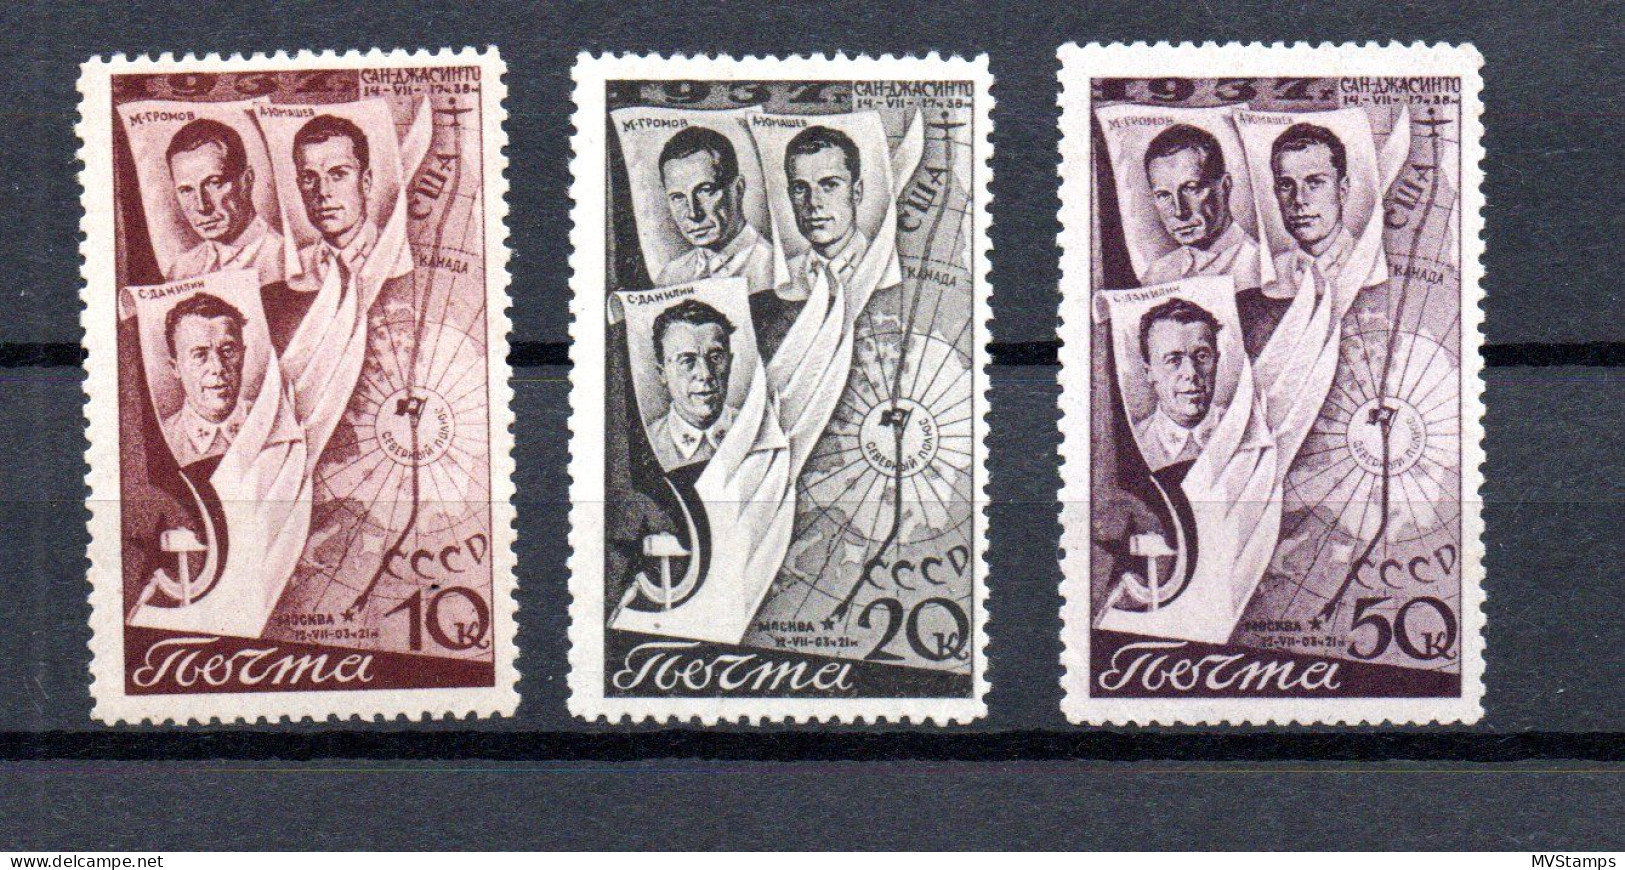 Russia 1938 Old Set Polar-Flight Moscow-San Jacinto Stamps (Michel 599/601) MLH - Unused Stamps